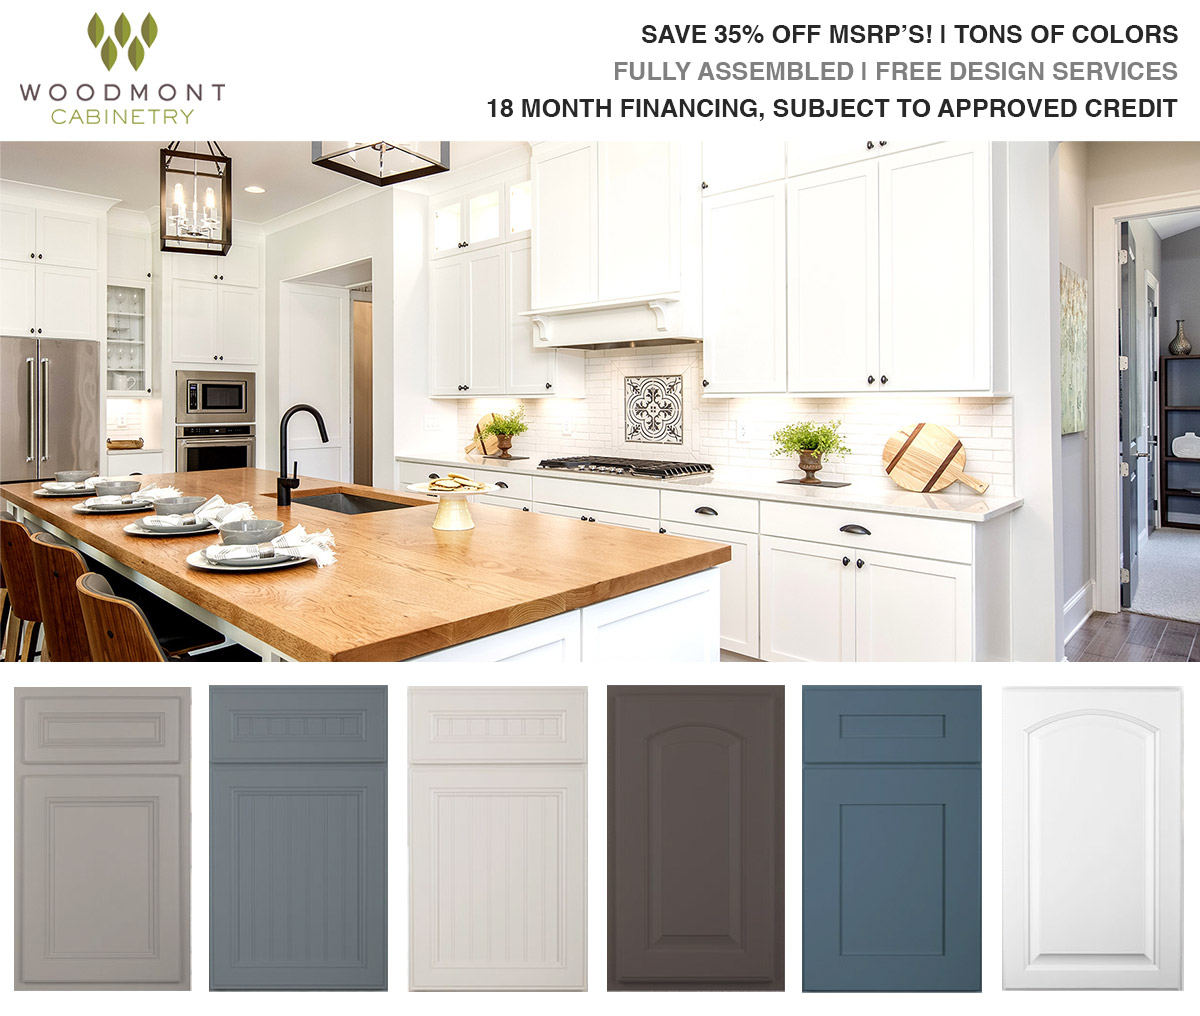 Woodmont Cabinets